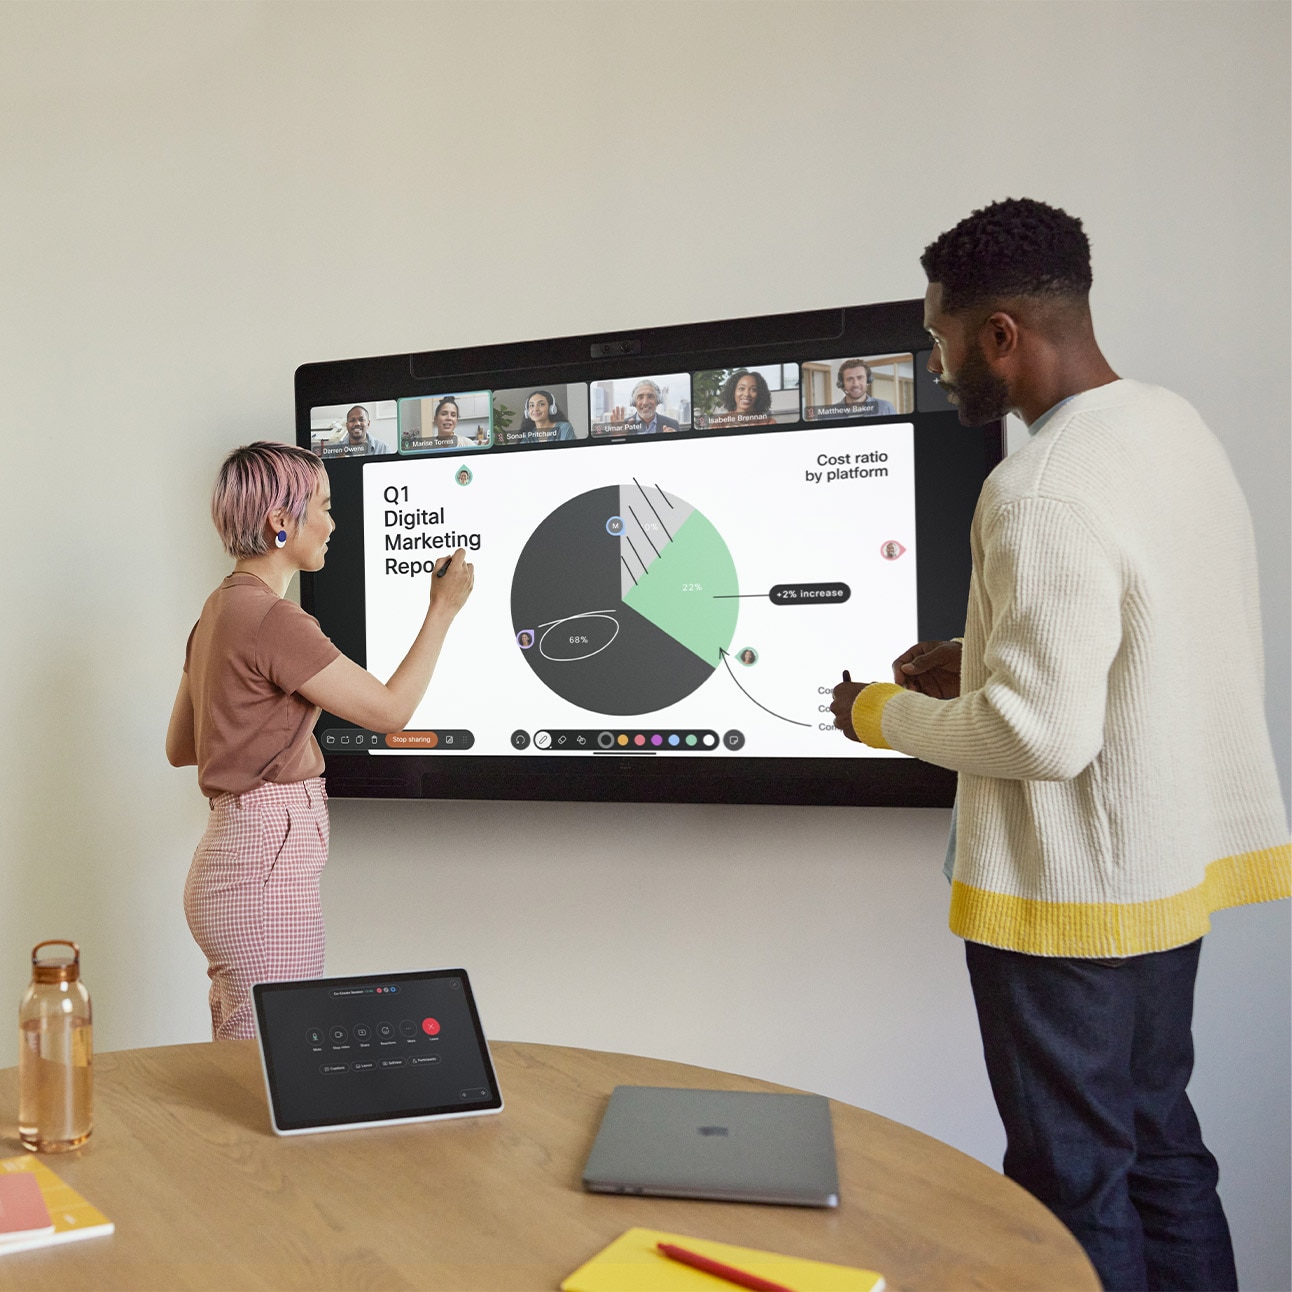 Two people collaborating and brainstorming in a small meeting room with the Cisco Board Pro mounted on the wall and the tabletop Cisco Room Navigator. Both persons hold a board pen and one of them is actively annotating on the digital whiteboard screen showing a pie chart, notes, arrows, and the live video of remote meeting participants.